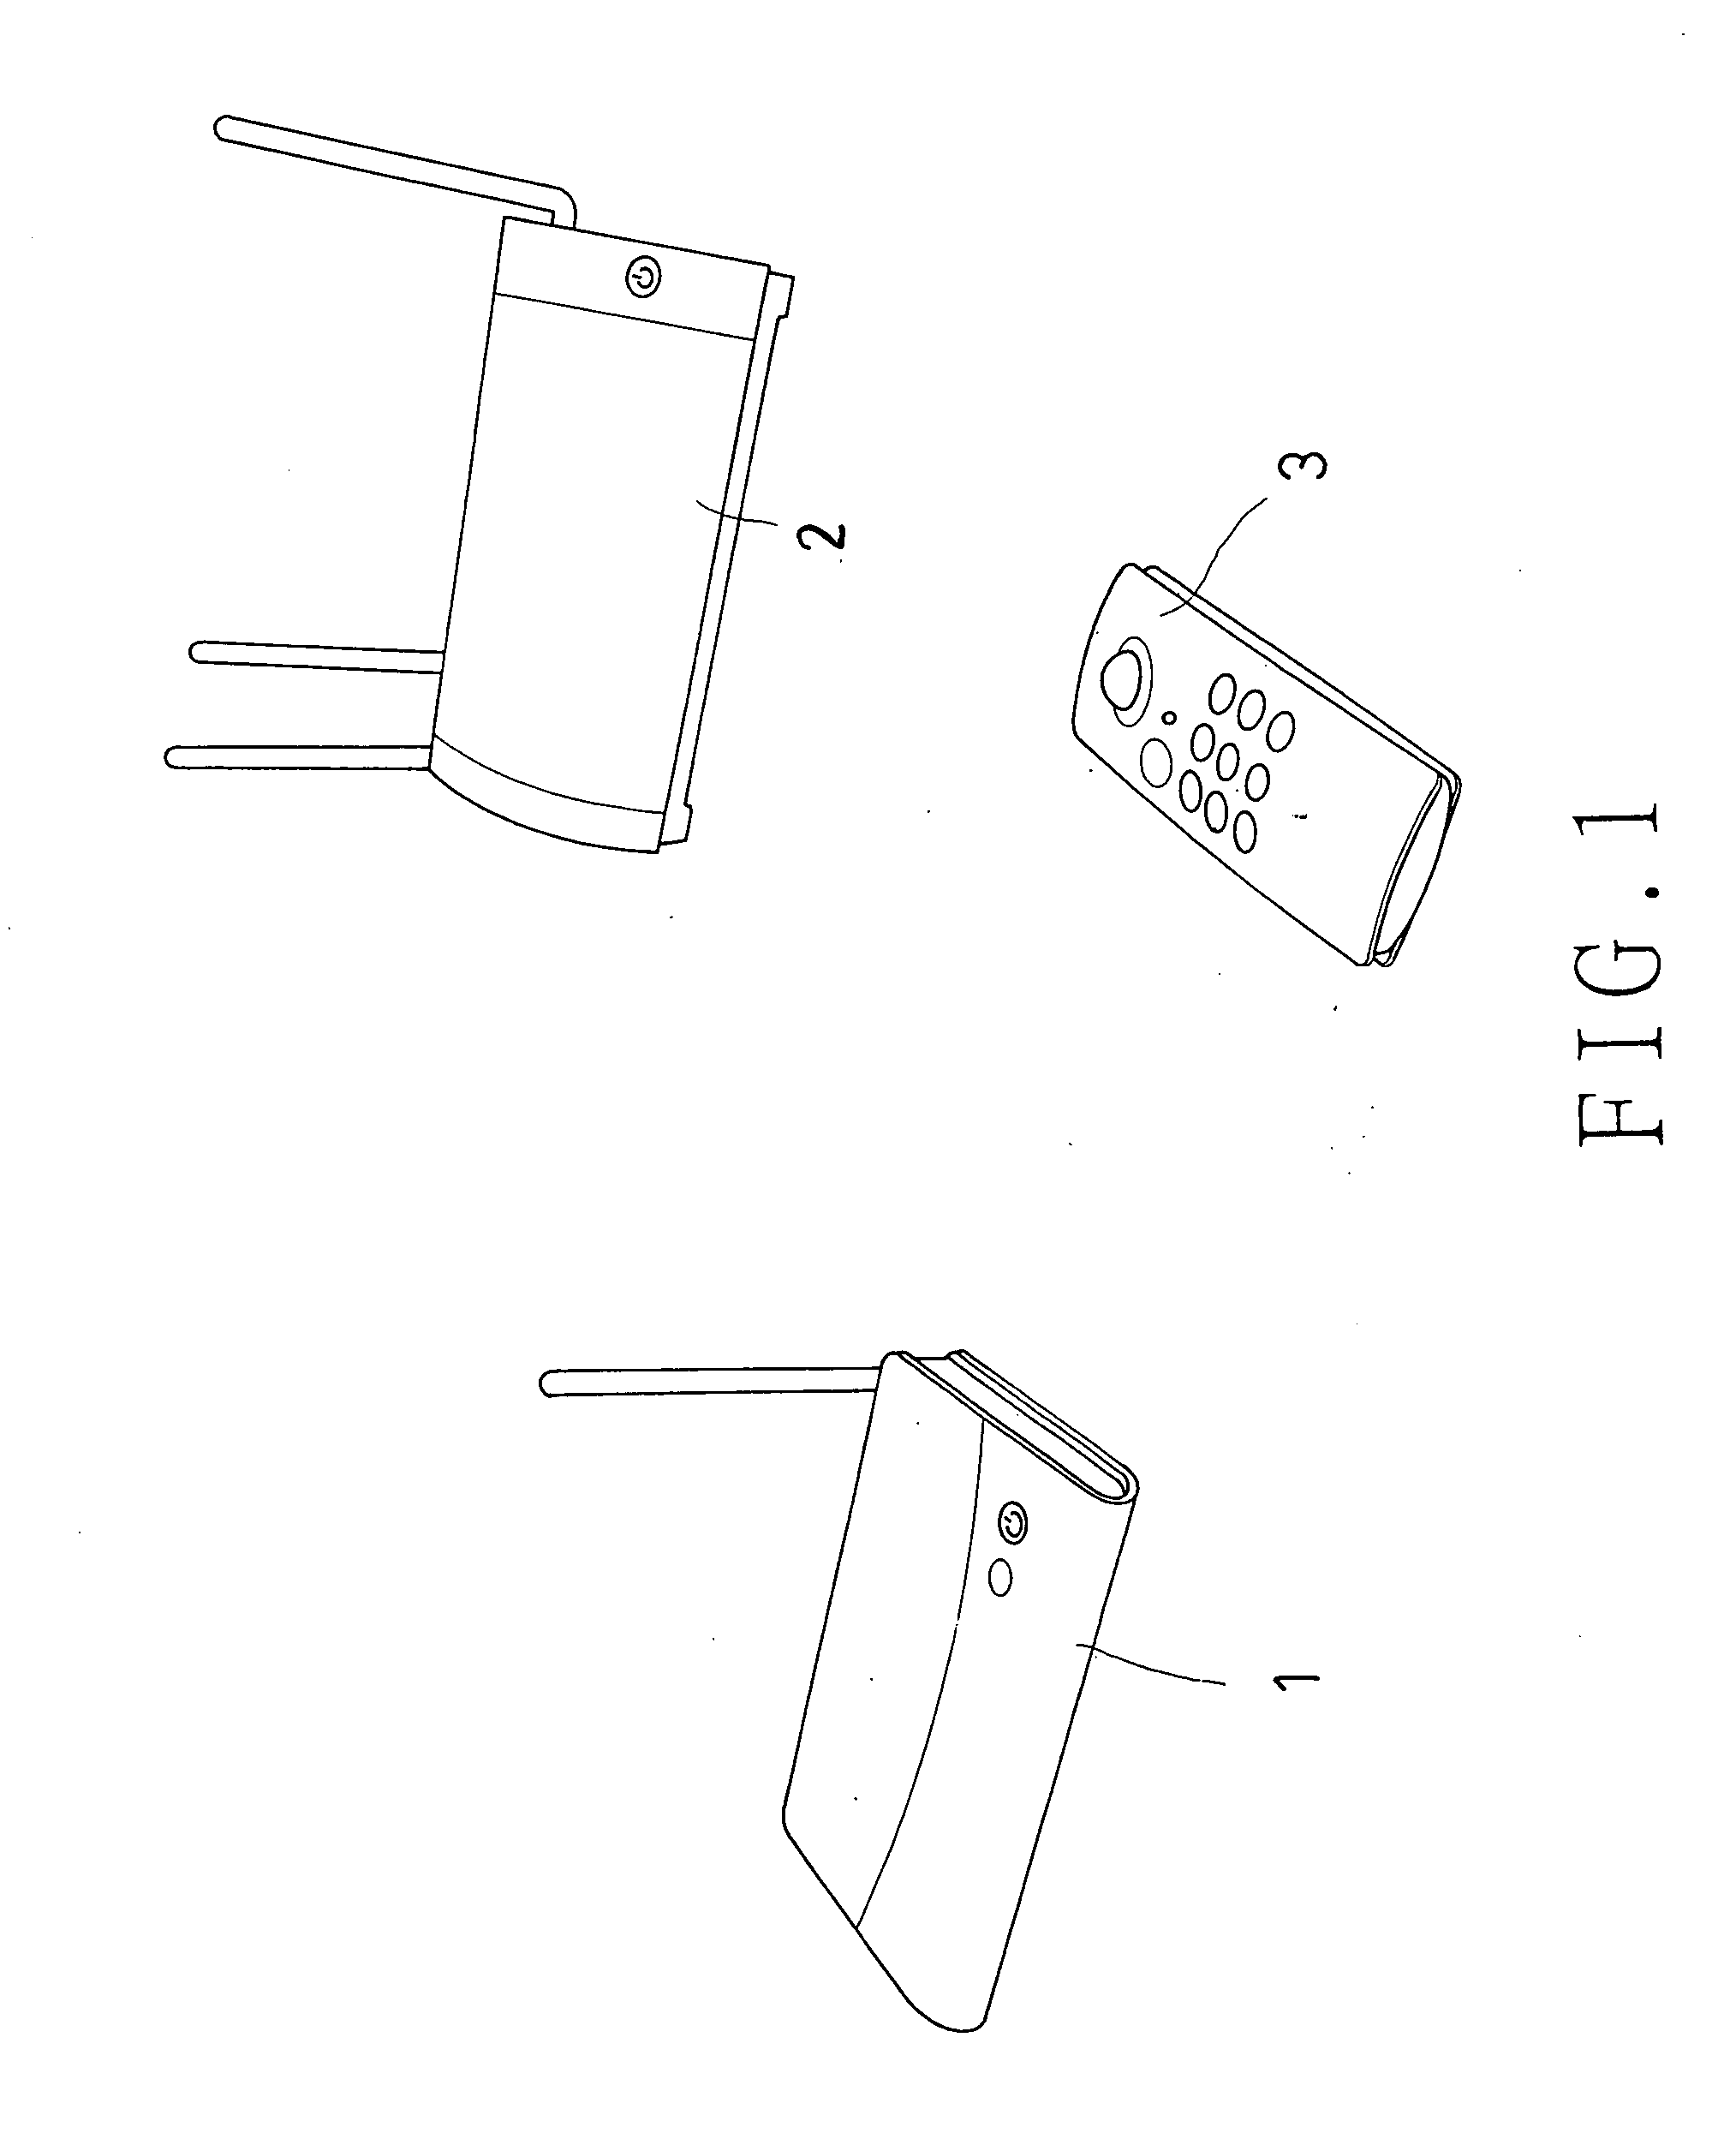 Wireless video and audio broadcasting device